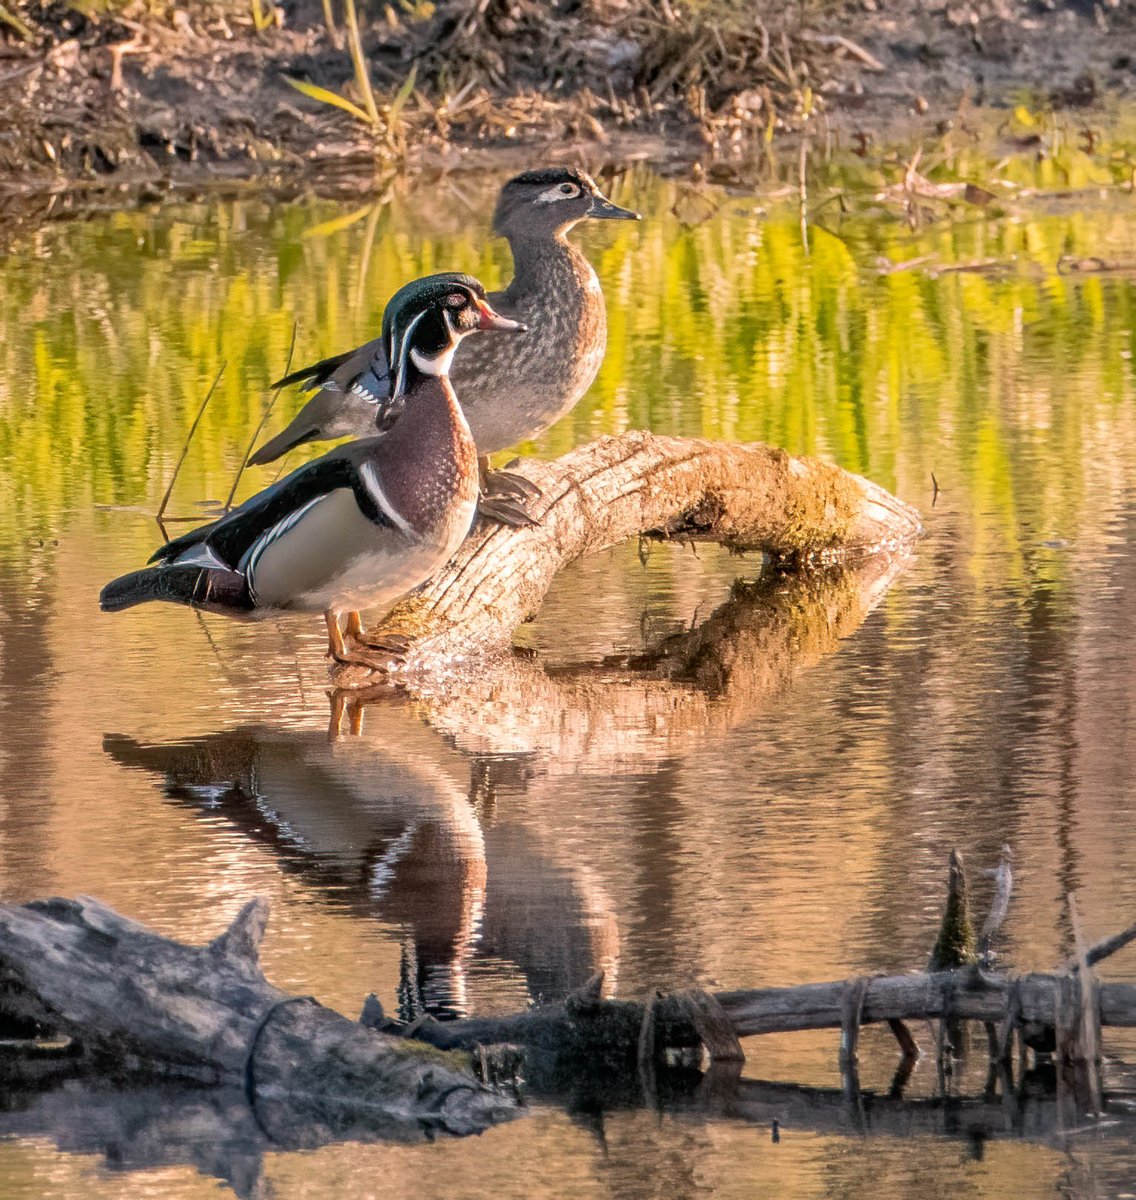 Morning Warmth

Even the animal kingdom enjoys the warmth of early mornings as our Minnesota weather turns from north winds scooting across wetland ponds to a broad hint of summer.  This wood duck pair is contemplating the day ahead.  #CambridgeMN https://t.co/PDBT8LLUfj